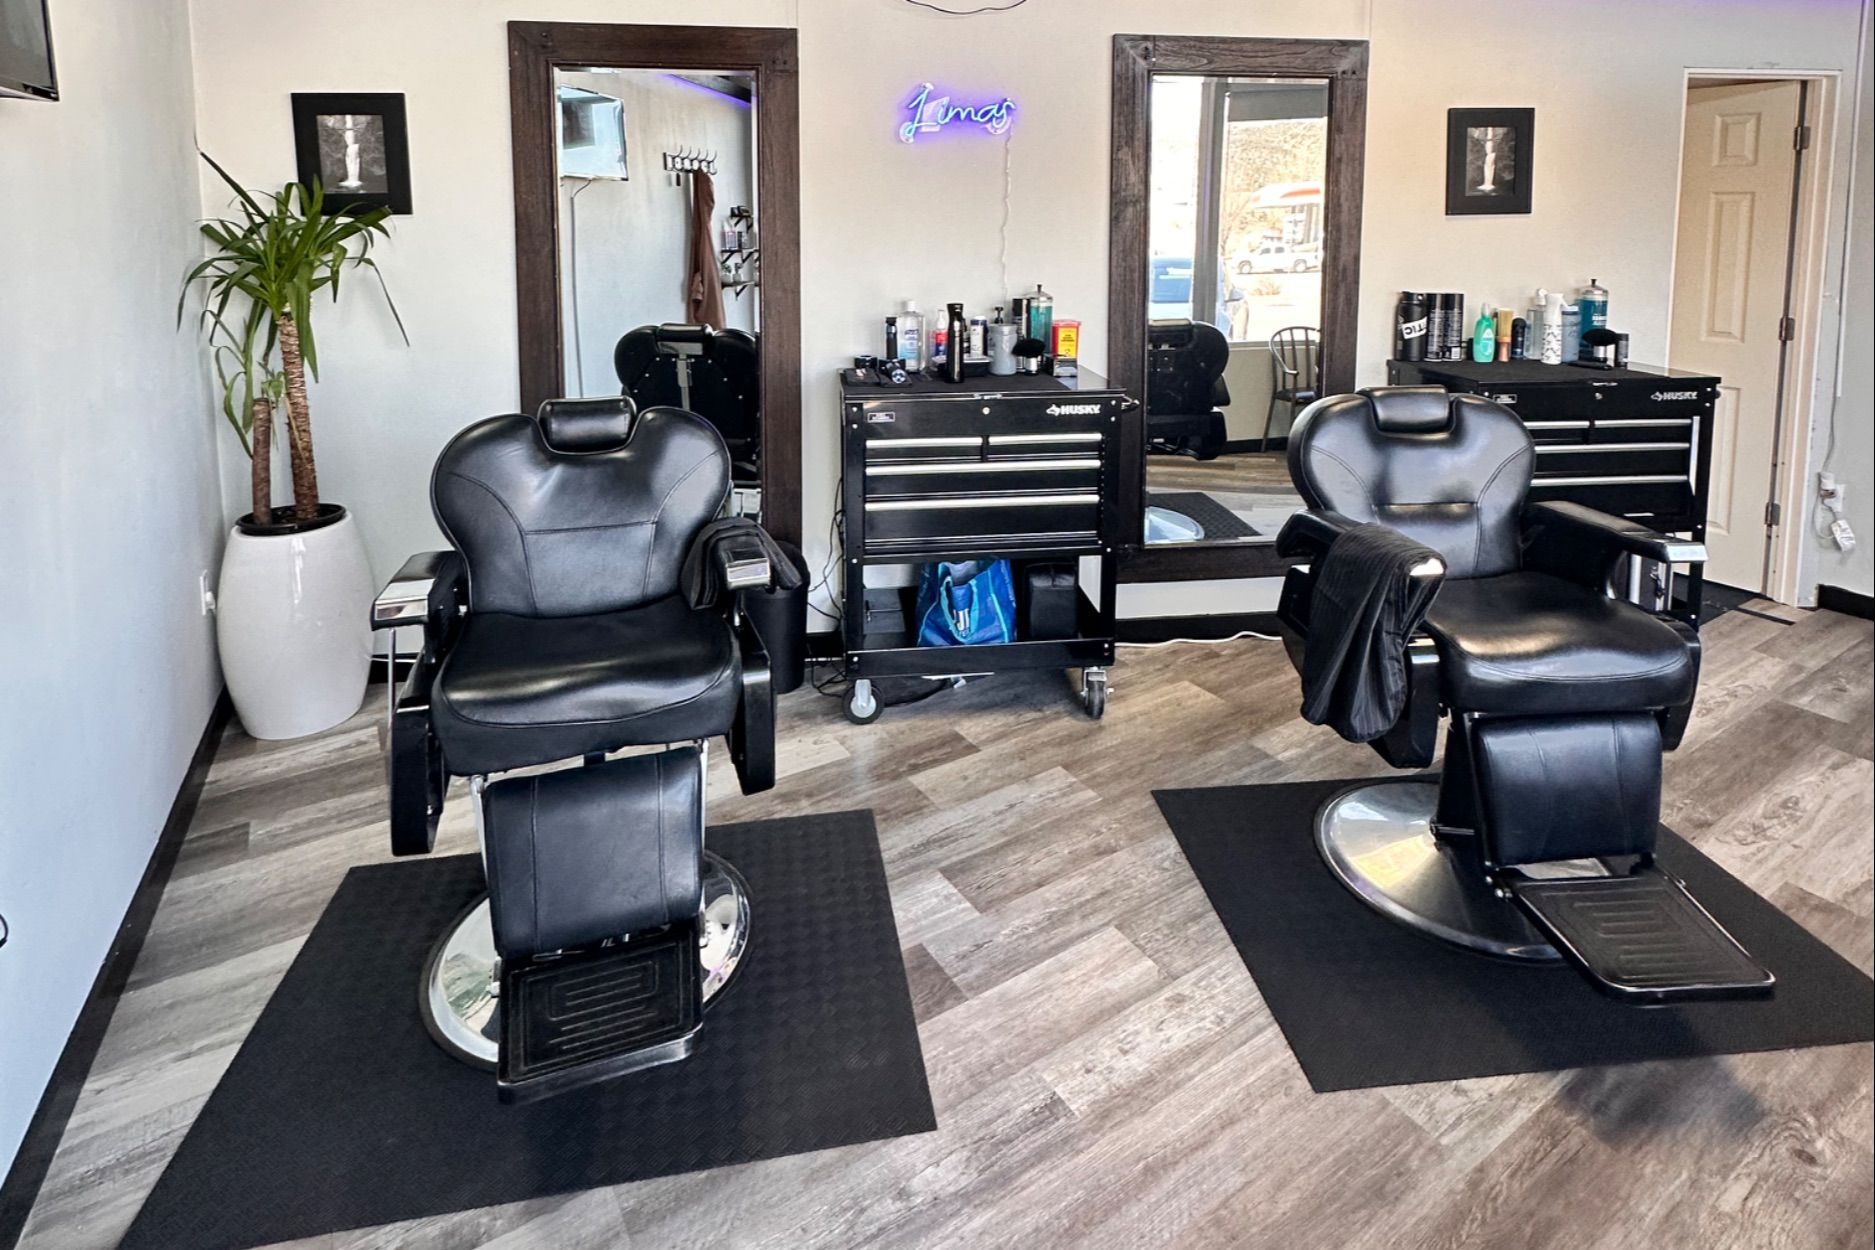 Best Hair Stylists near Vail Ranch Barber Shop in Temecula, CA - Yelp